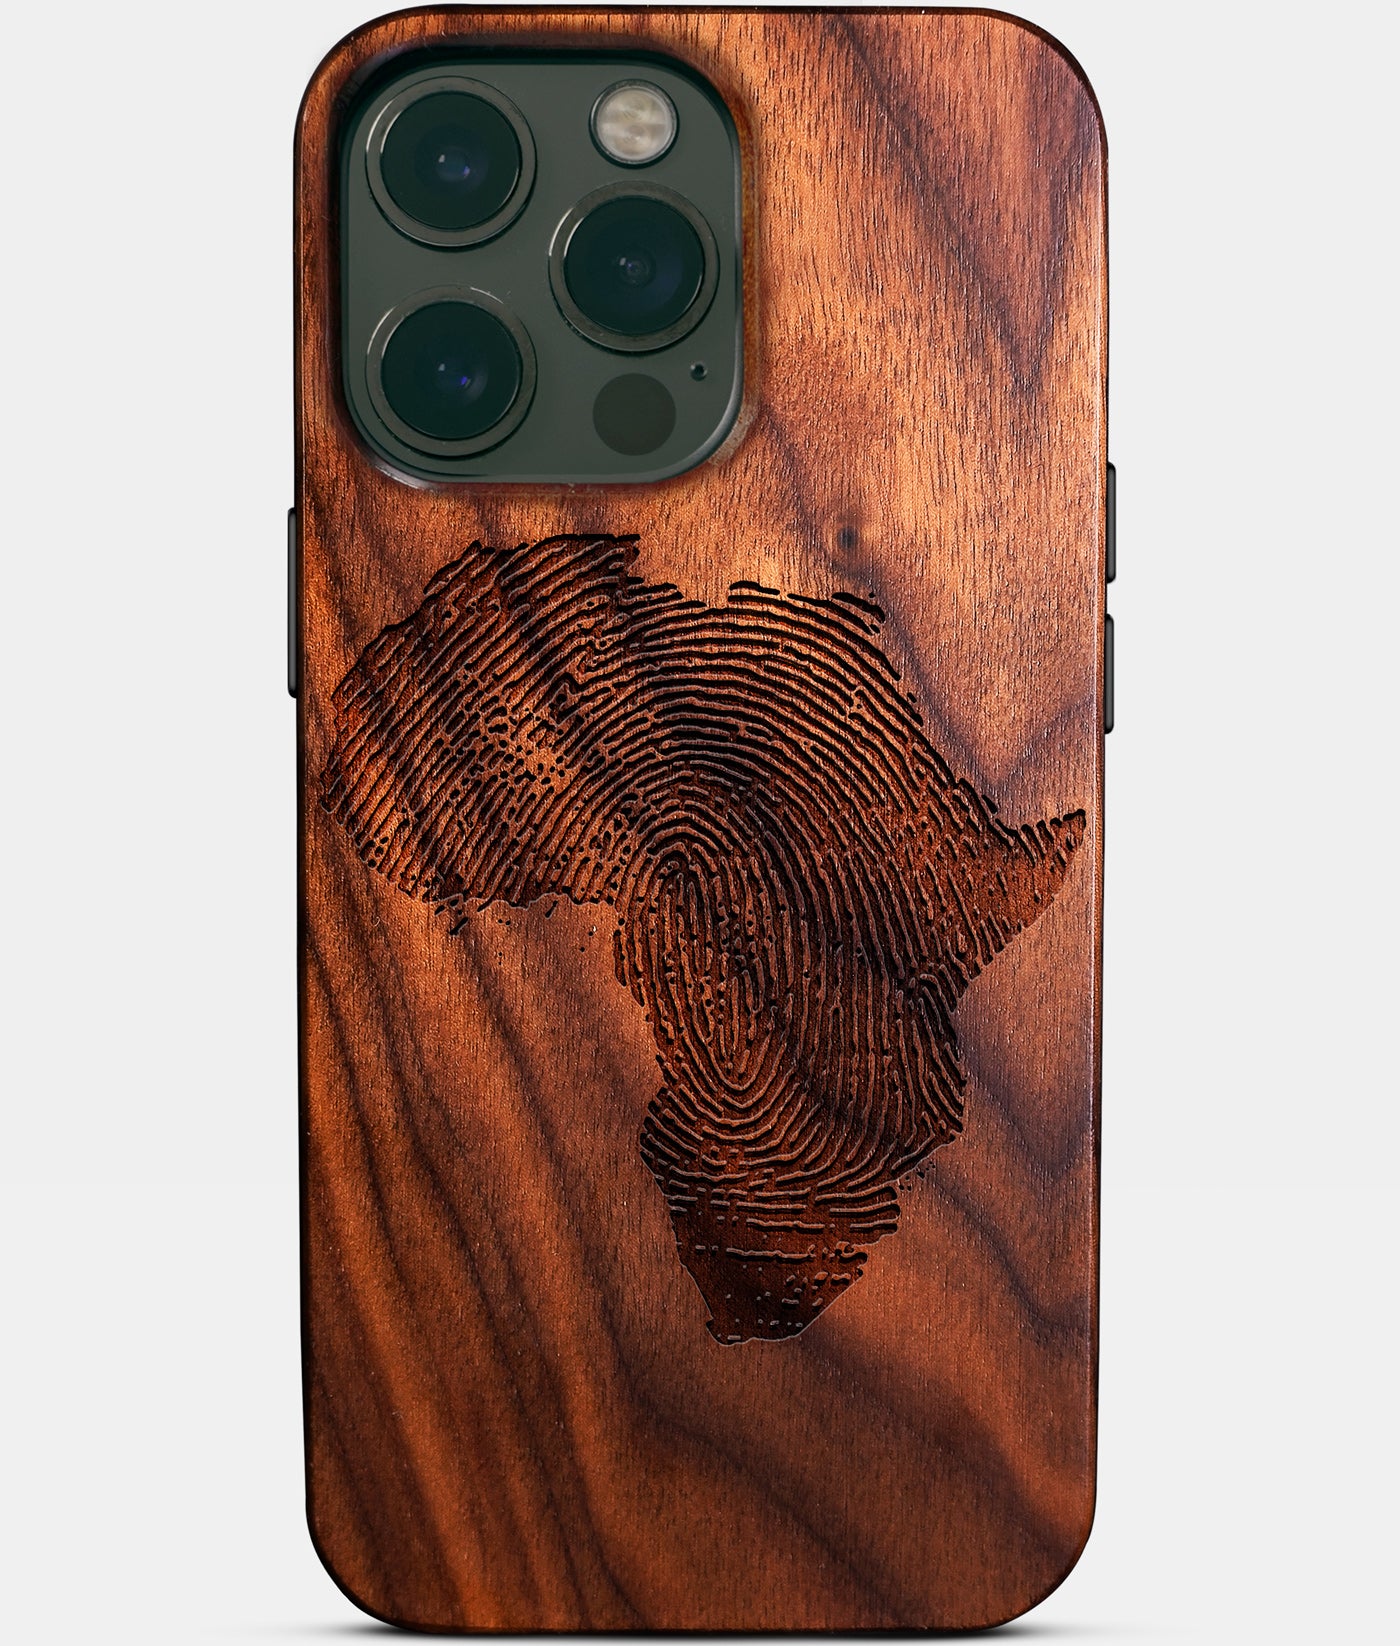 Africa Fingerprint Shape Map Wood iPhone 14 Pro Max Case - iPhone 13 Pro Max Case - HBCU Gear College Graduation Gifts For Black Men And Women iPhone 12, 12 Pro Max, iPhone 11 Pro, 11 Pro Max, iPhone X/XS Max, iPhone XR Case Black Owned Gifts 2022 Christmas Gifts - African American Black Owned Businesses iPhone 14 Pro Max Cover In Los Angeles 2022 Custom Gifts For Personalized Black Men